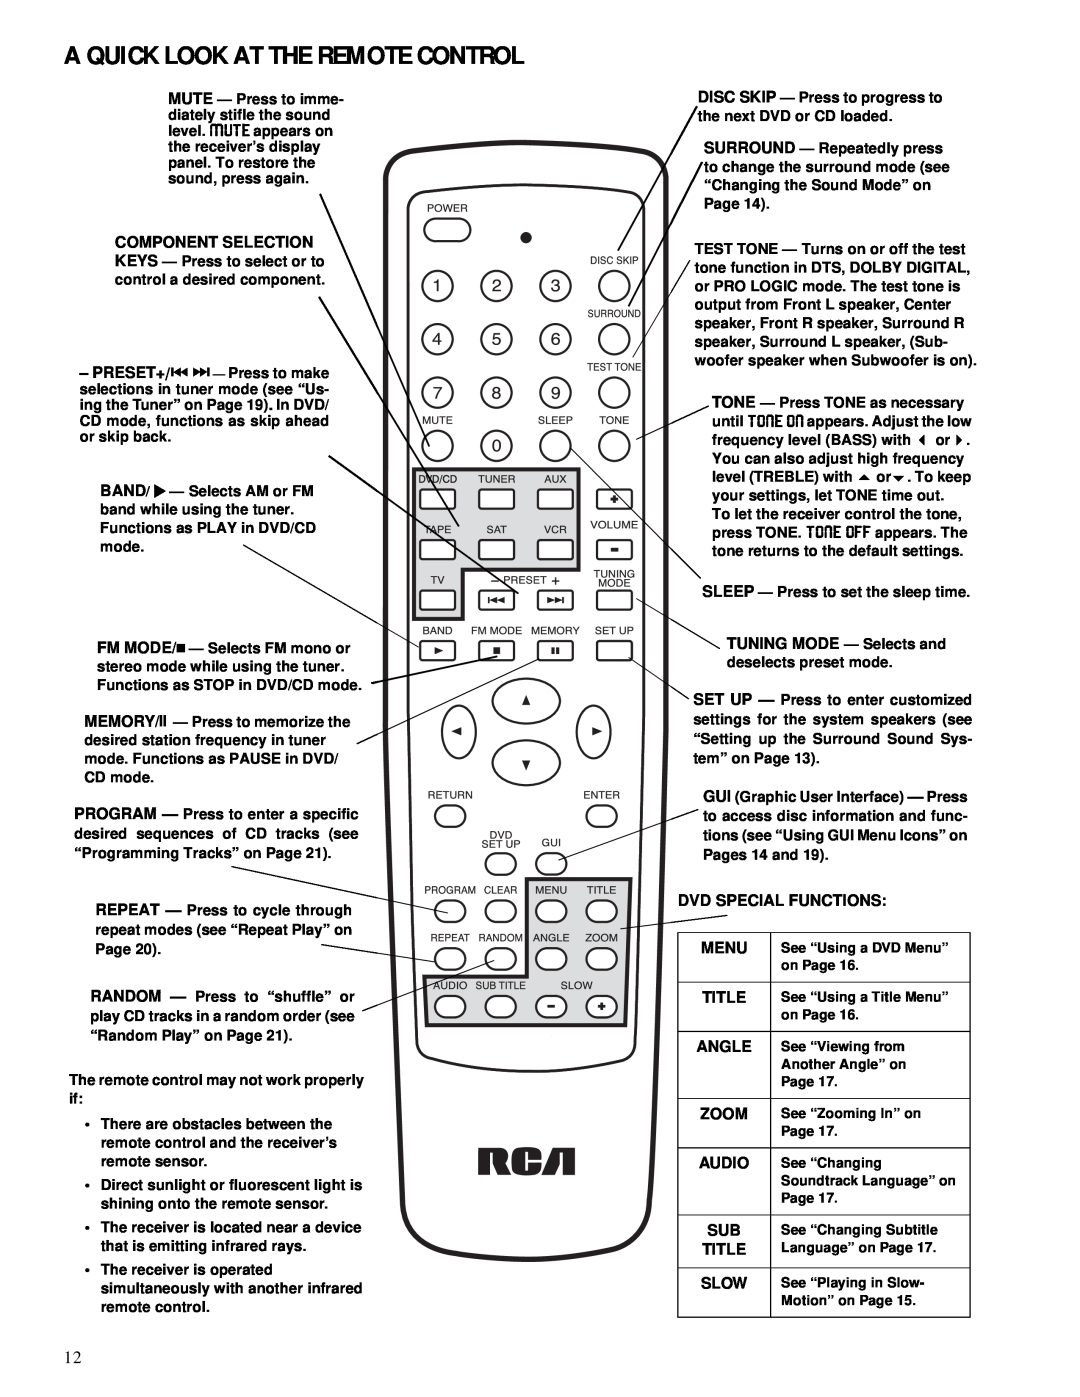 RCA 600-Watt manual A Quick Look At The Remote Control, Dvd Special Functions, Menu, Title, Angle, Zoom, Audio, Slow 